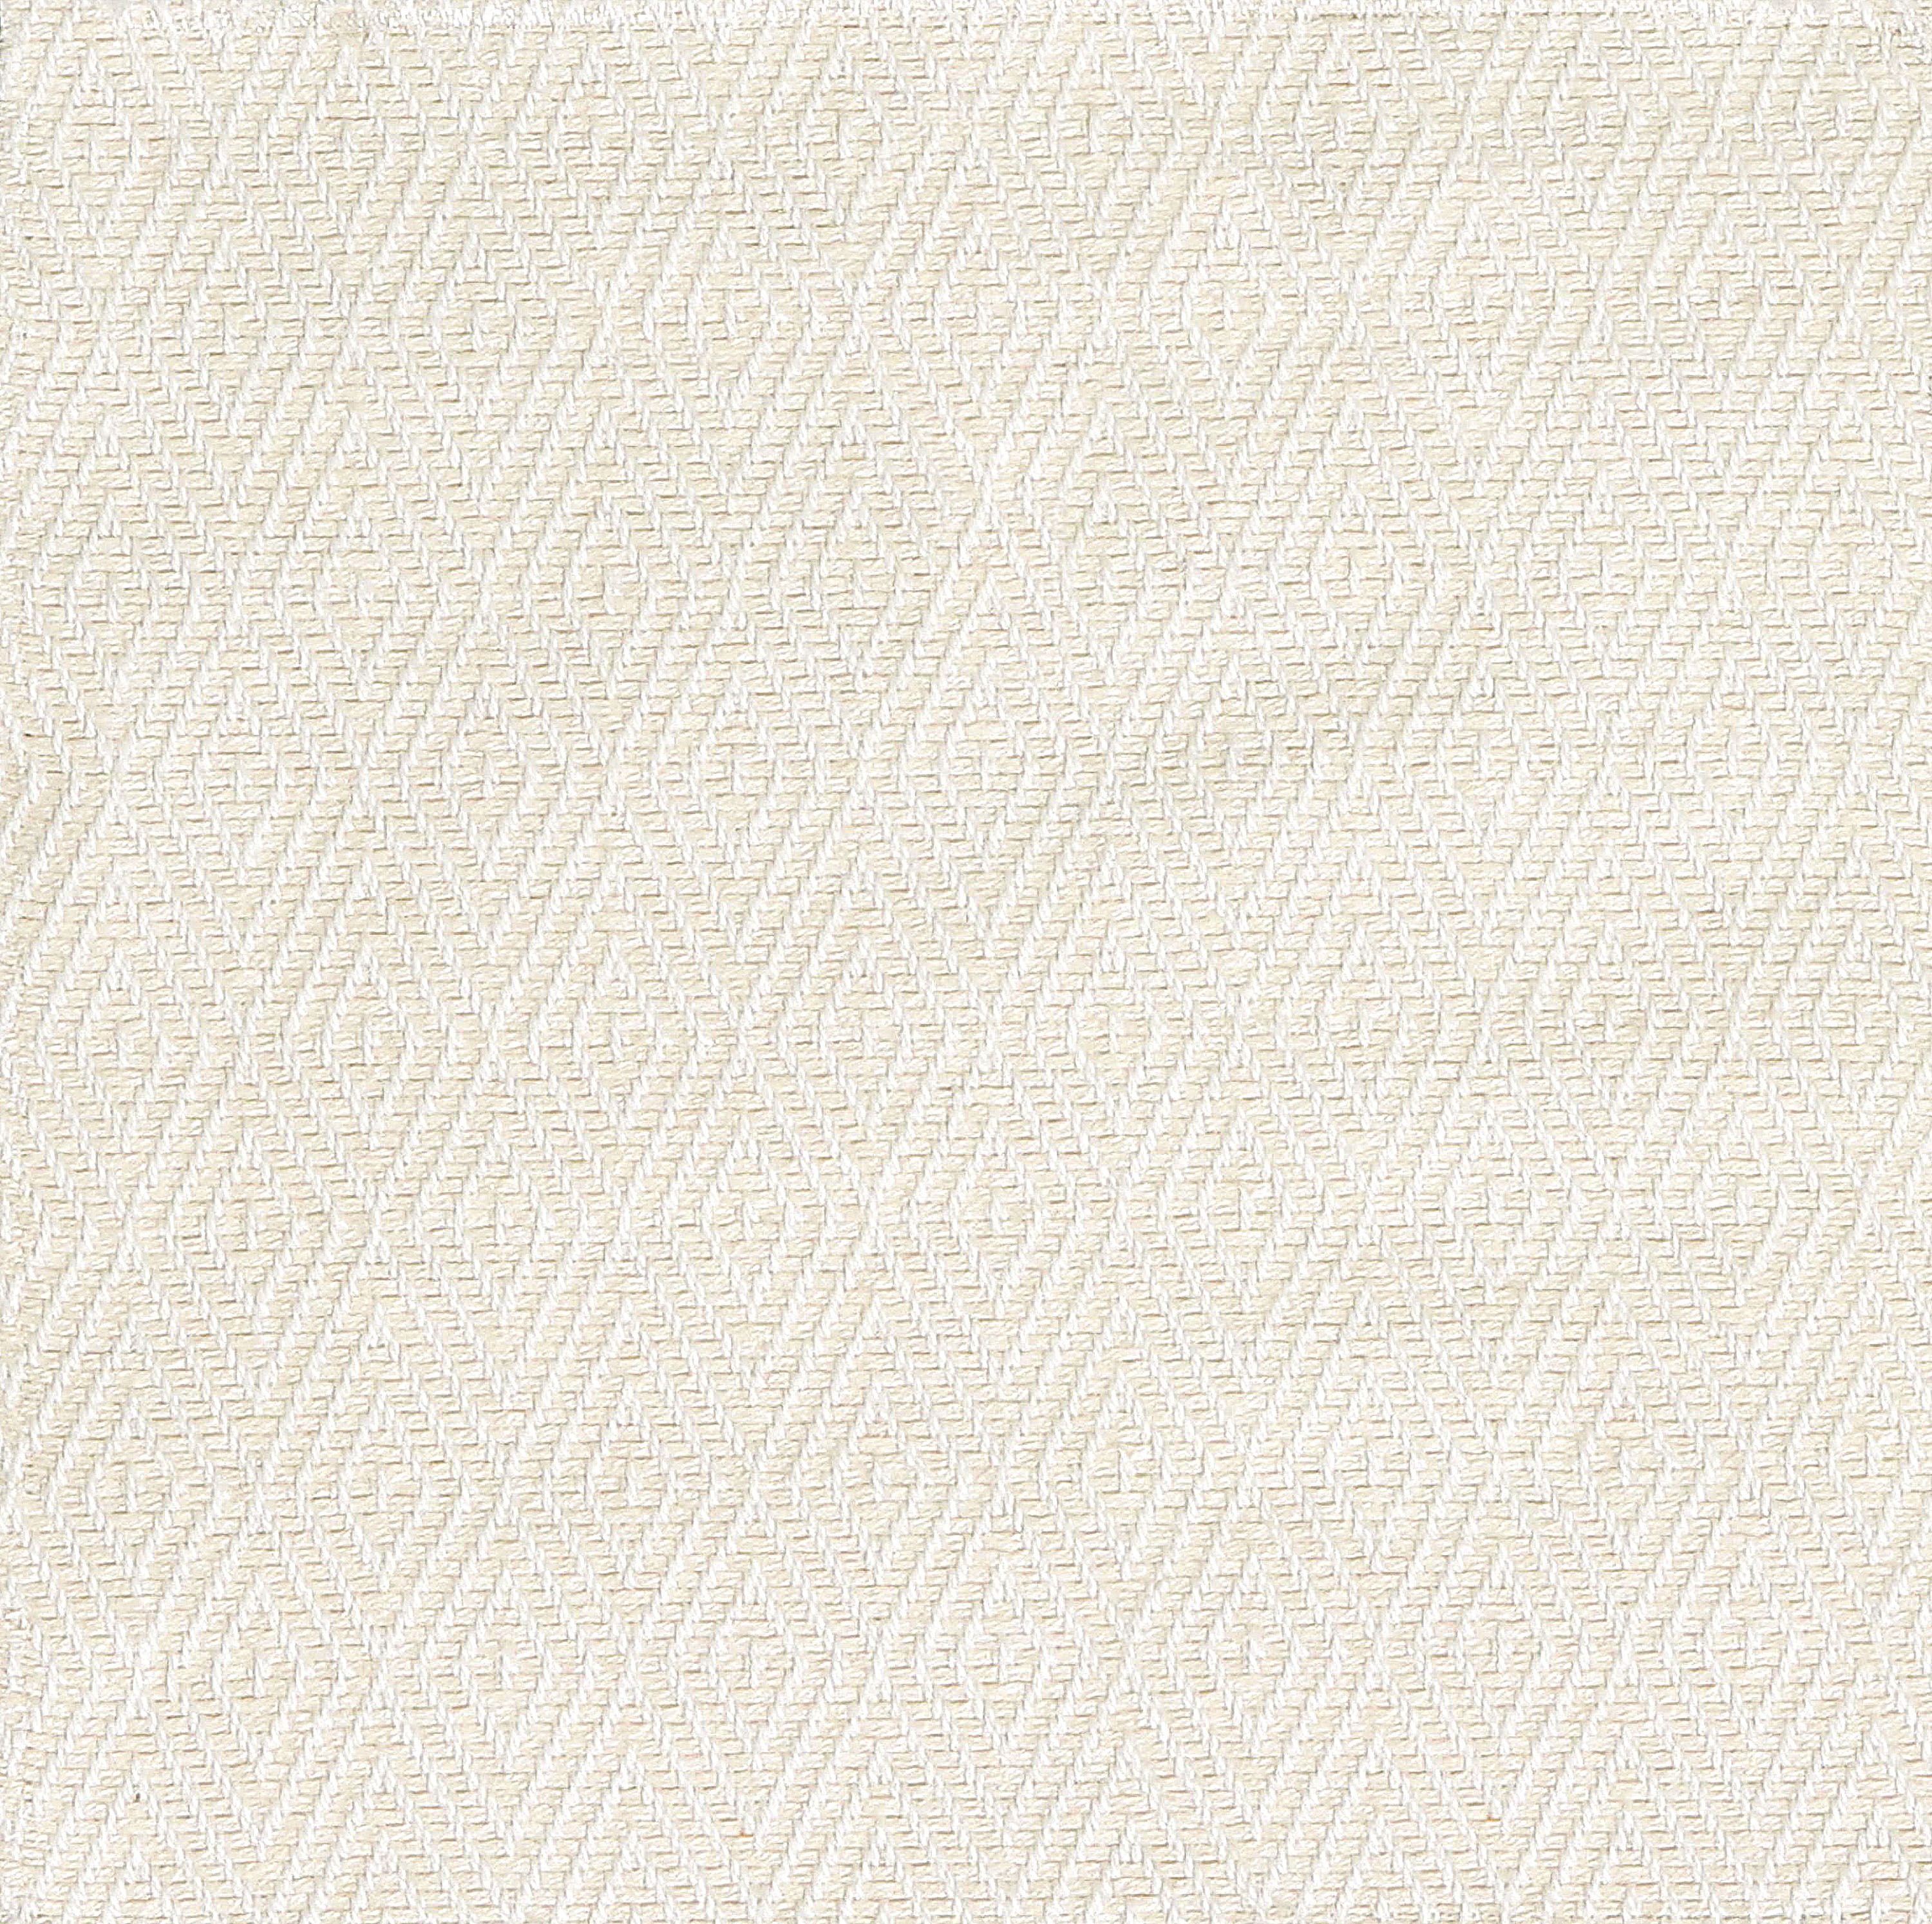 Mokala Revrs fabric in ivory color - pattern number ZS 00028095 - by Scalamandre in the Old World Weavers collection